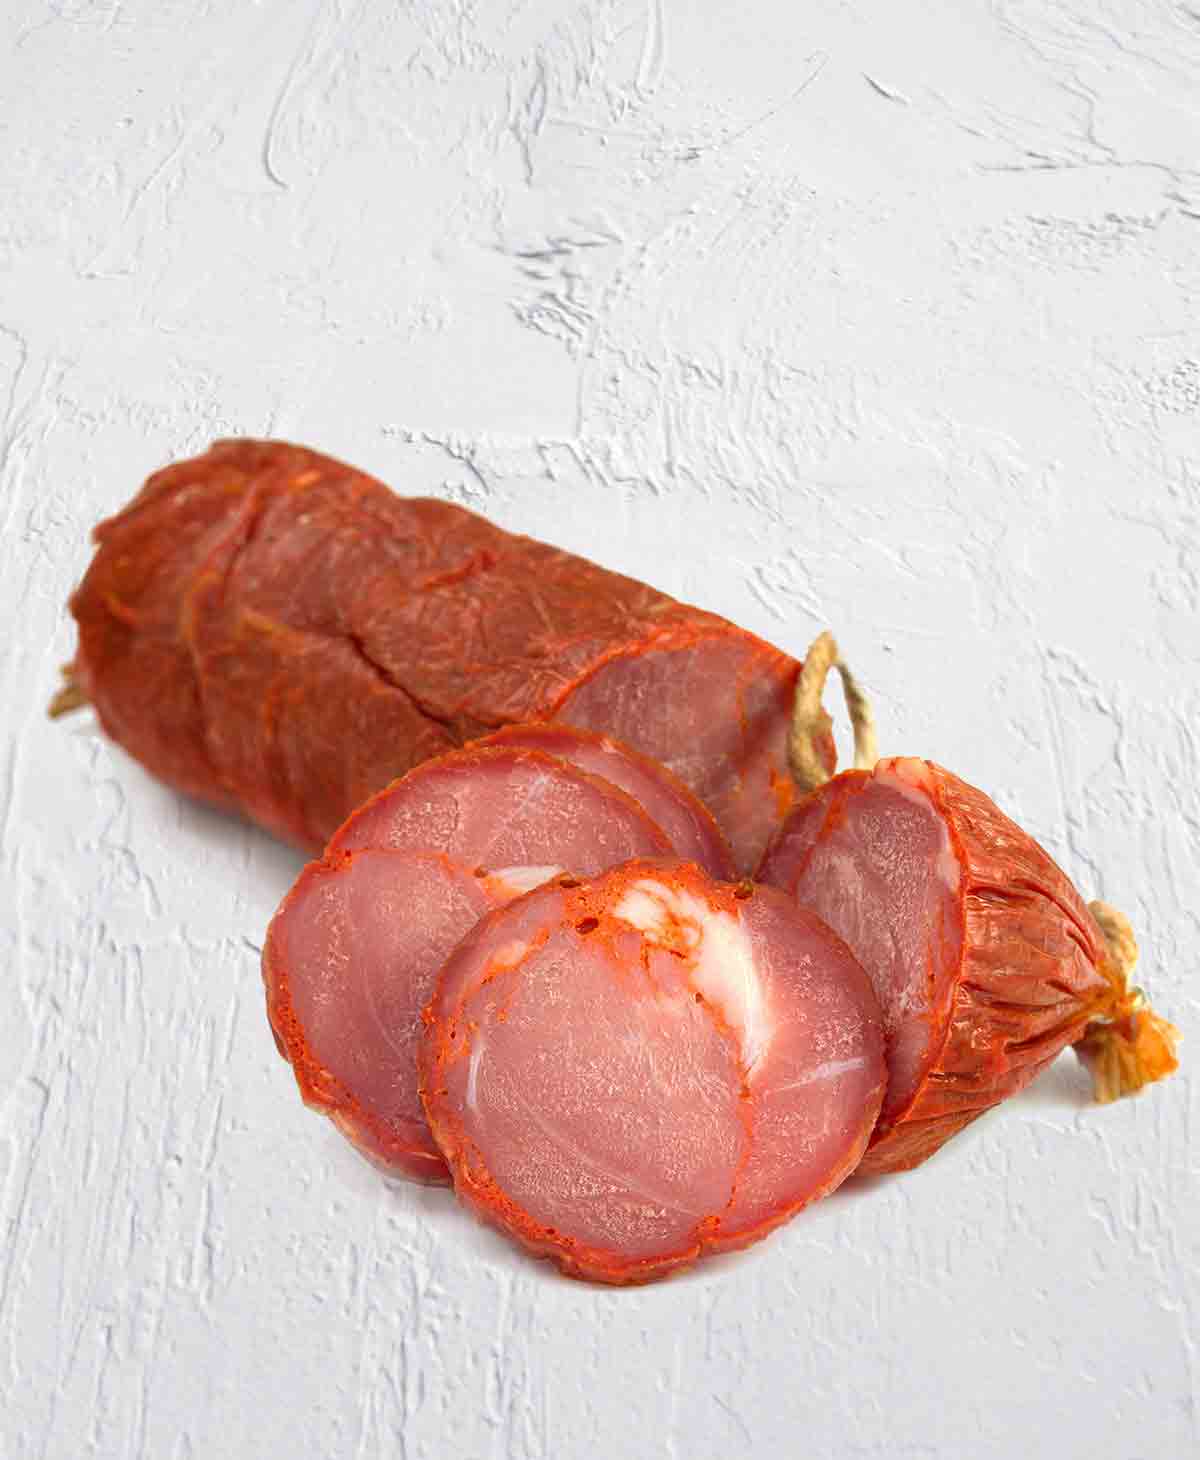 A link of salpicao pork sausage from Portugal